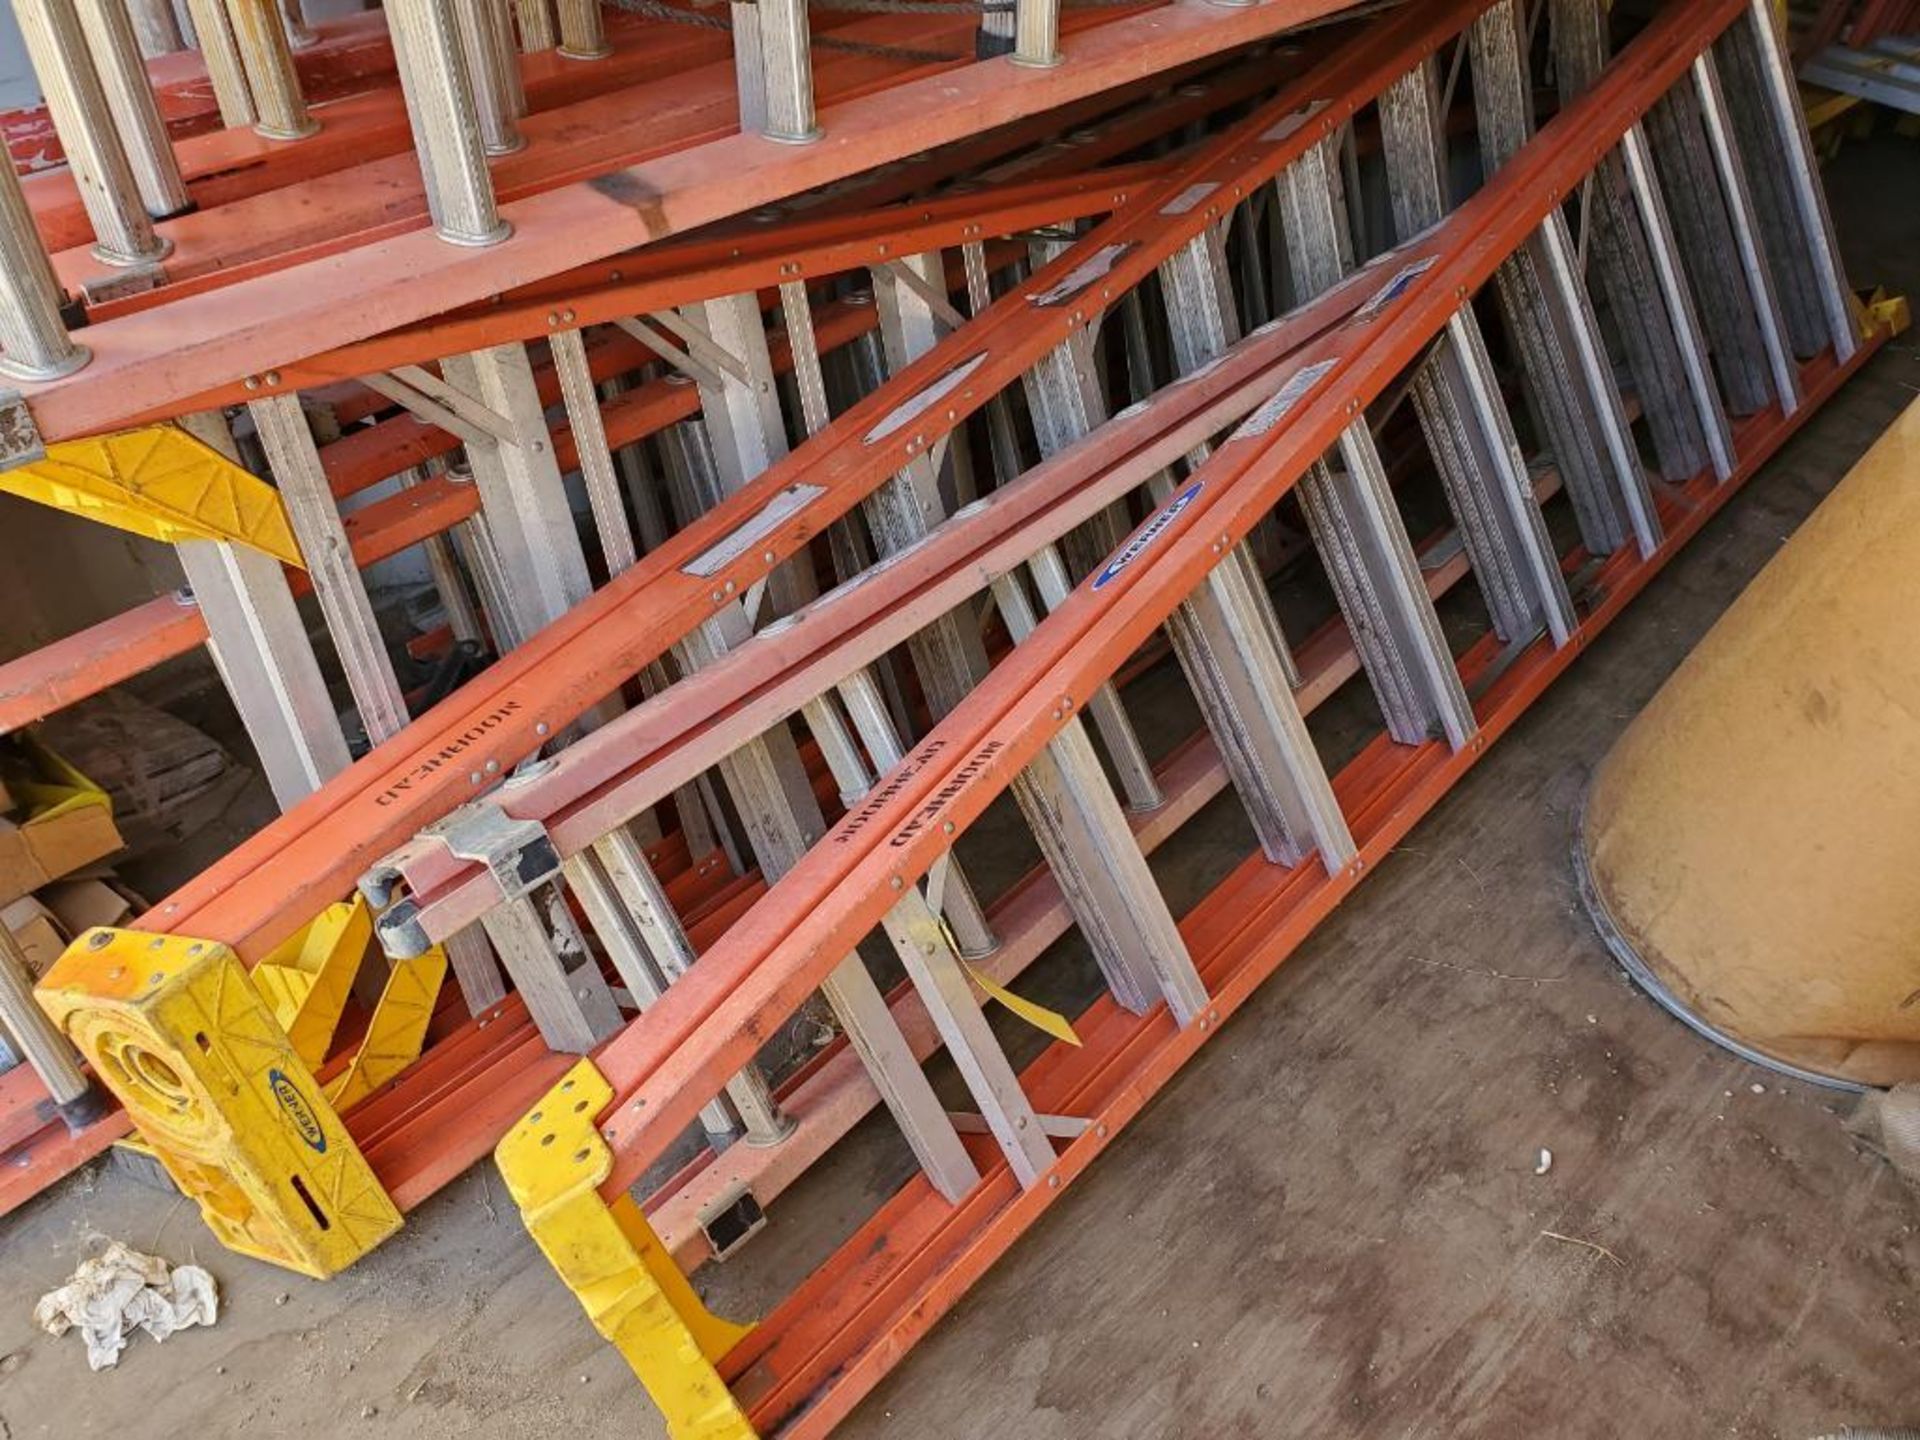 (12) ASSORTED WERNER EXTENSION LADDERS AND STEP LADDERS 10'-24' - Image 3 of 5